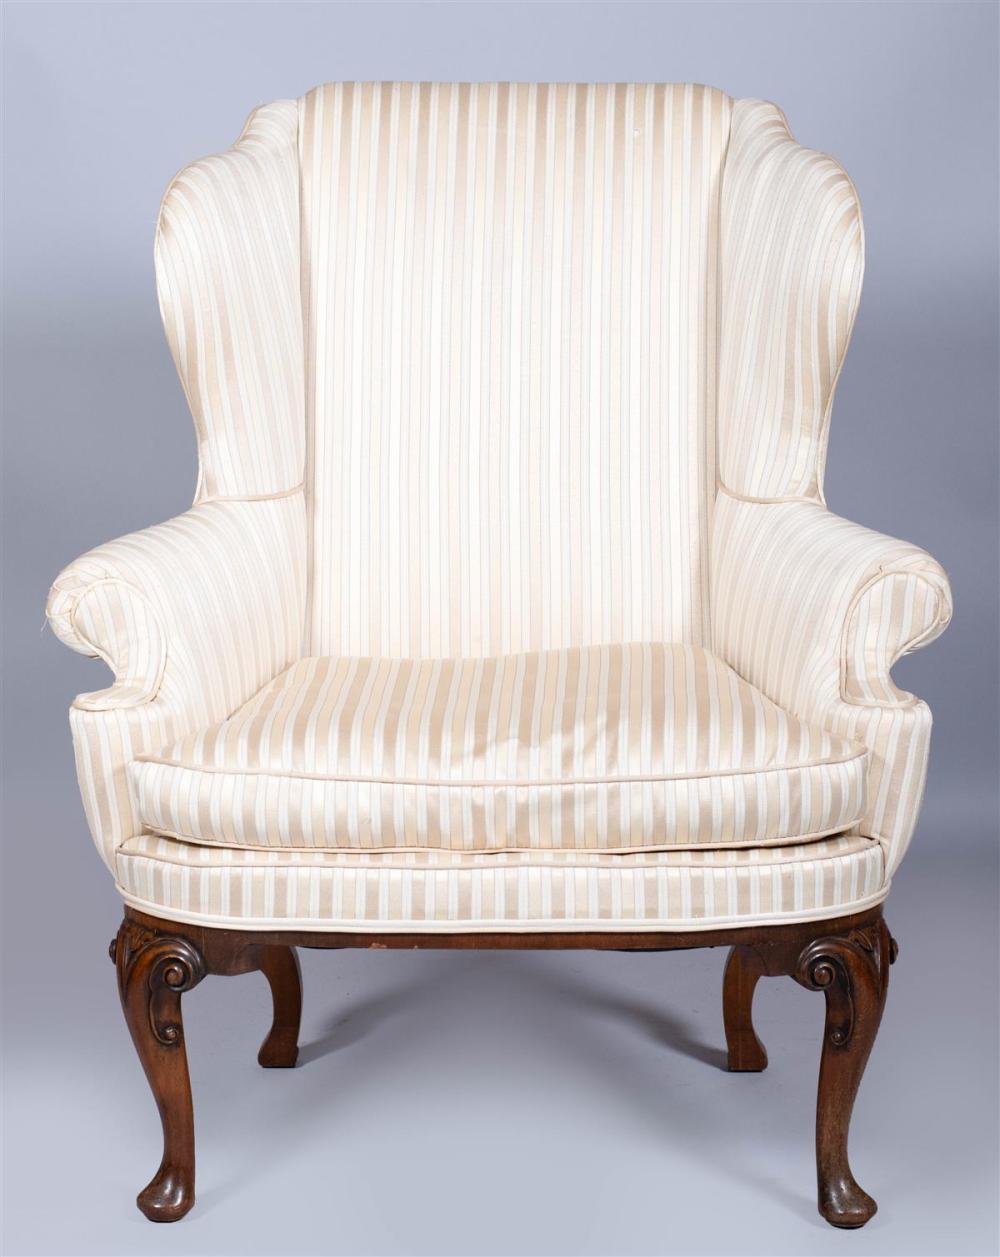 QUEEN ANNE STYLE MAHOGANY WING 33b5b2